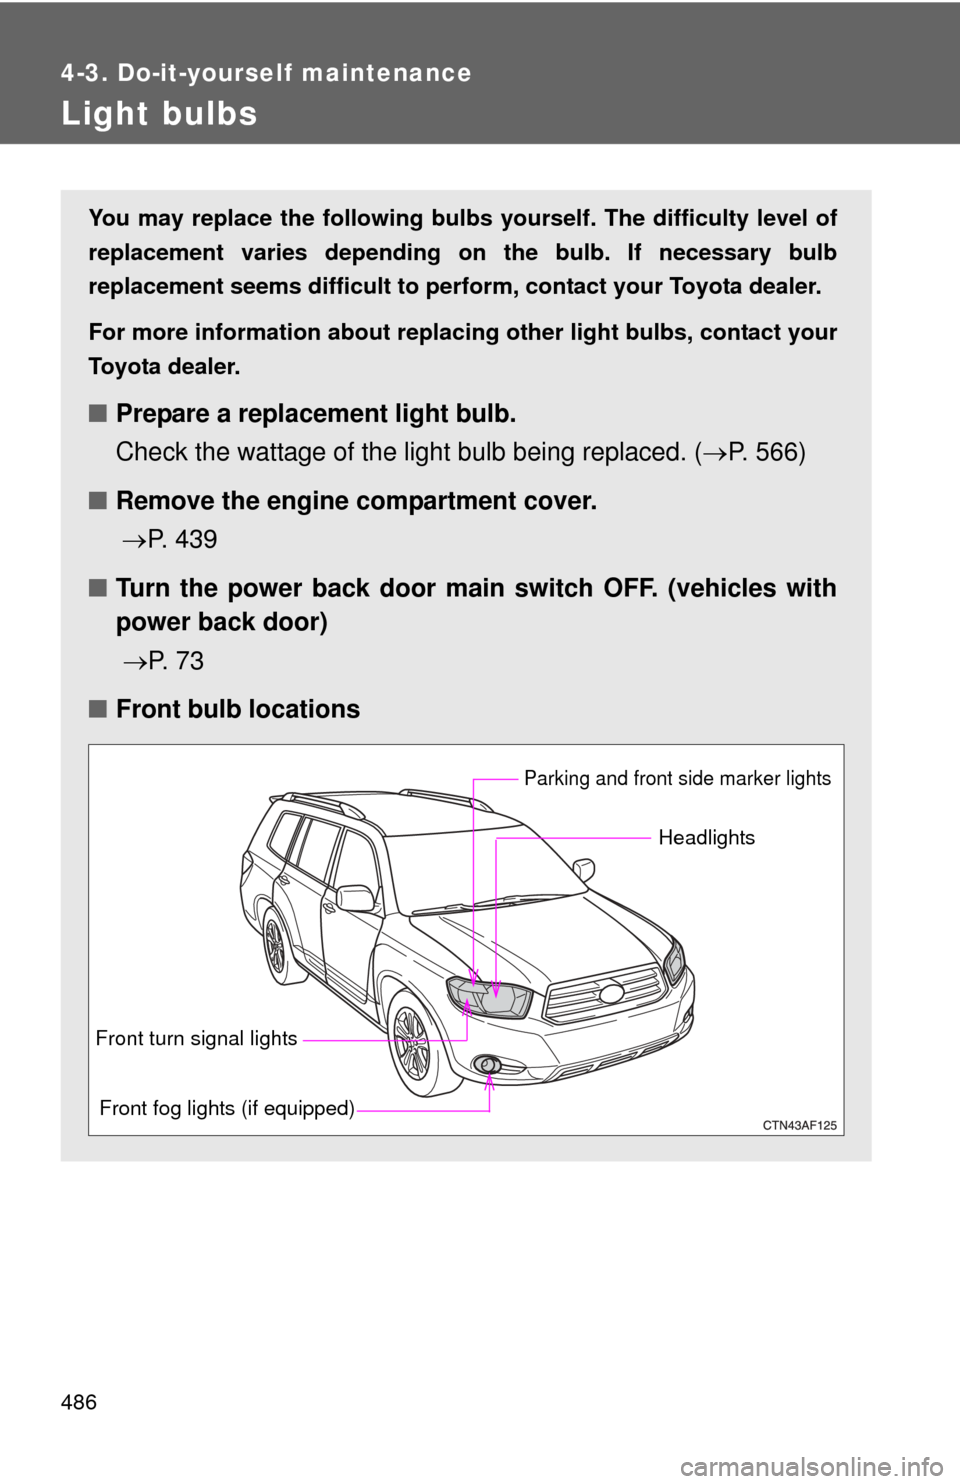 TOYOTA HIGHLANDER 2010 XU40 / 2.G Owners Manual 486
4-3. Do-it-yourself maintenance
Light bulbs
You may replace the following bulbs yourself. The difficulty level of
replacement varies depending on the bulb. If necessary bulb
replacement seems diff